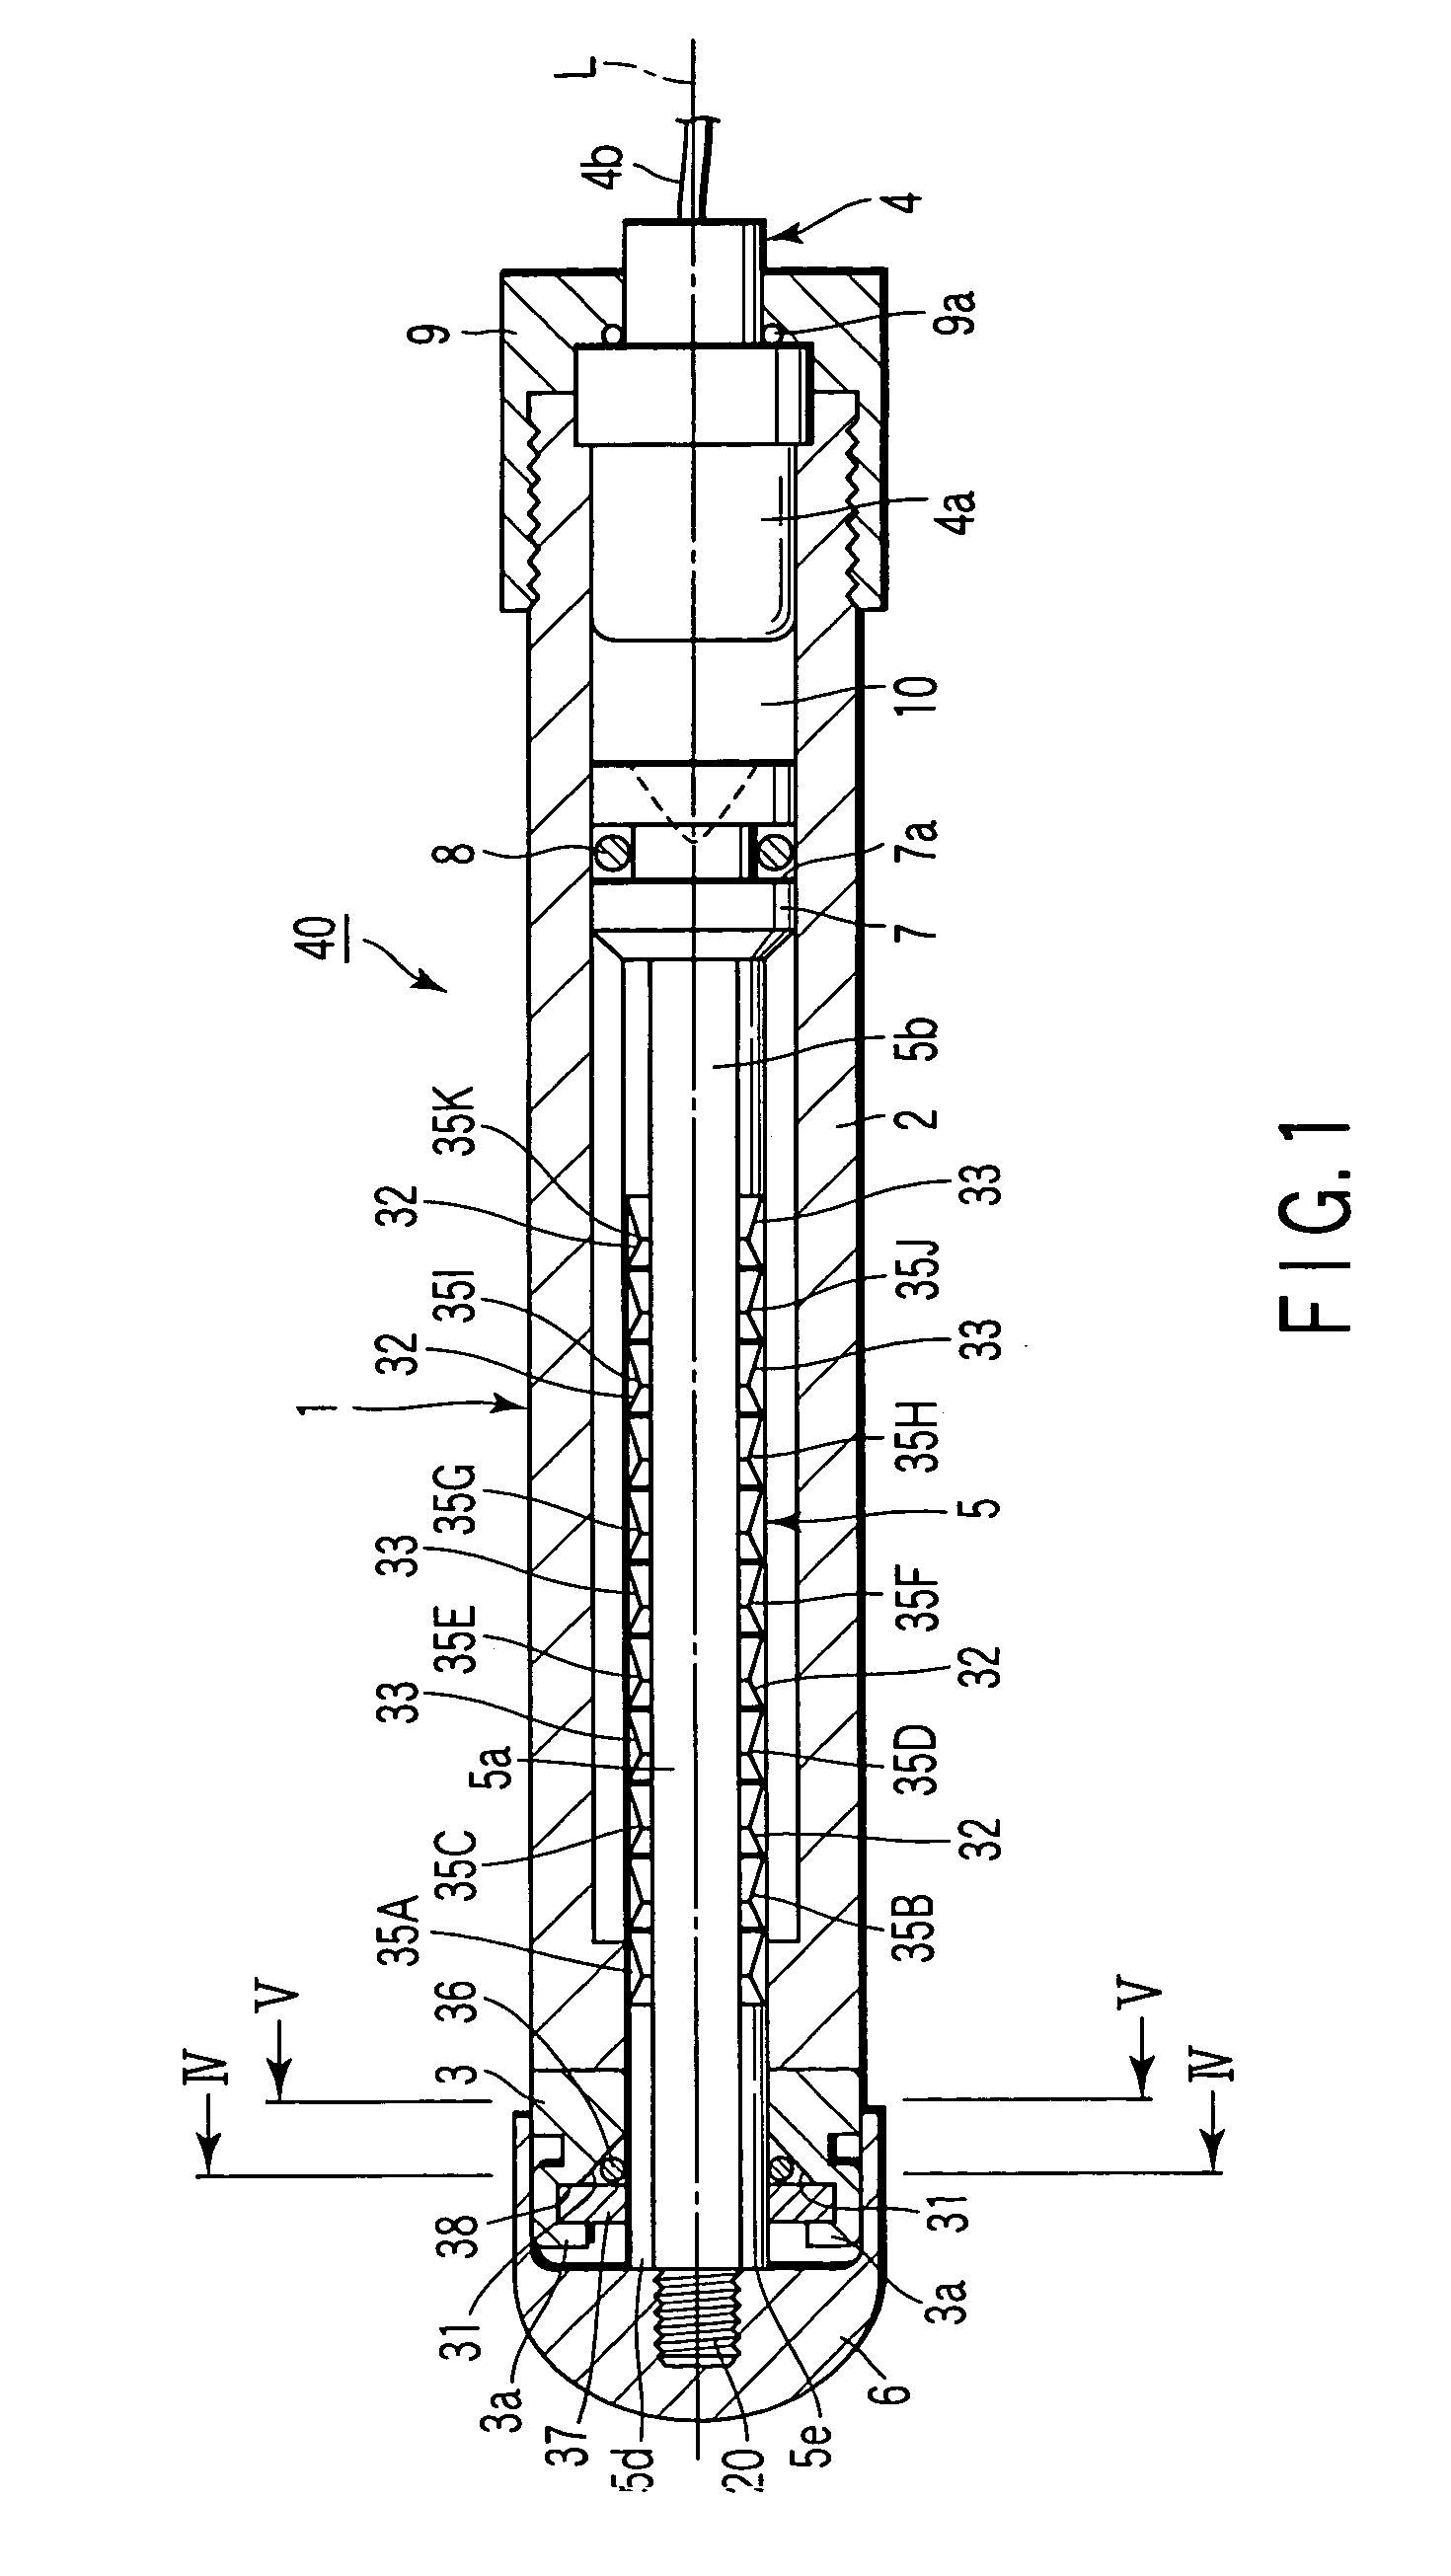 Actuator provided with locking mechanism